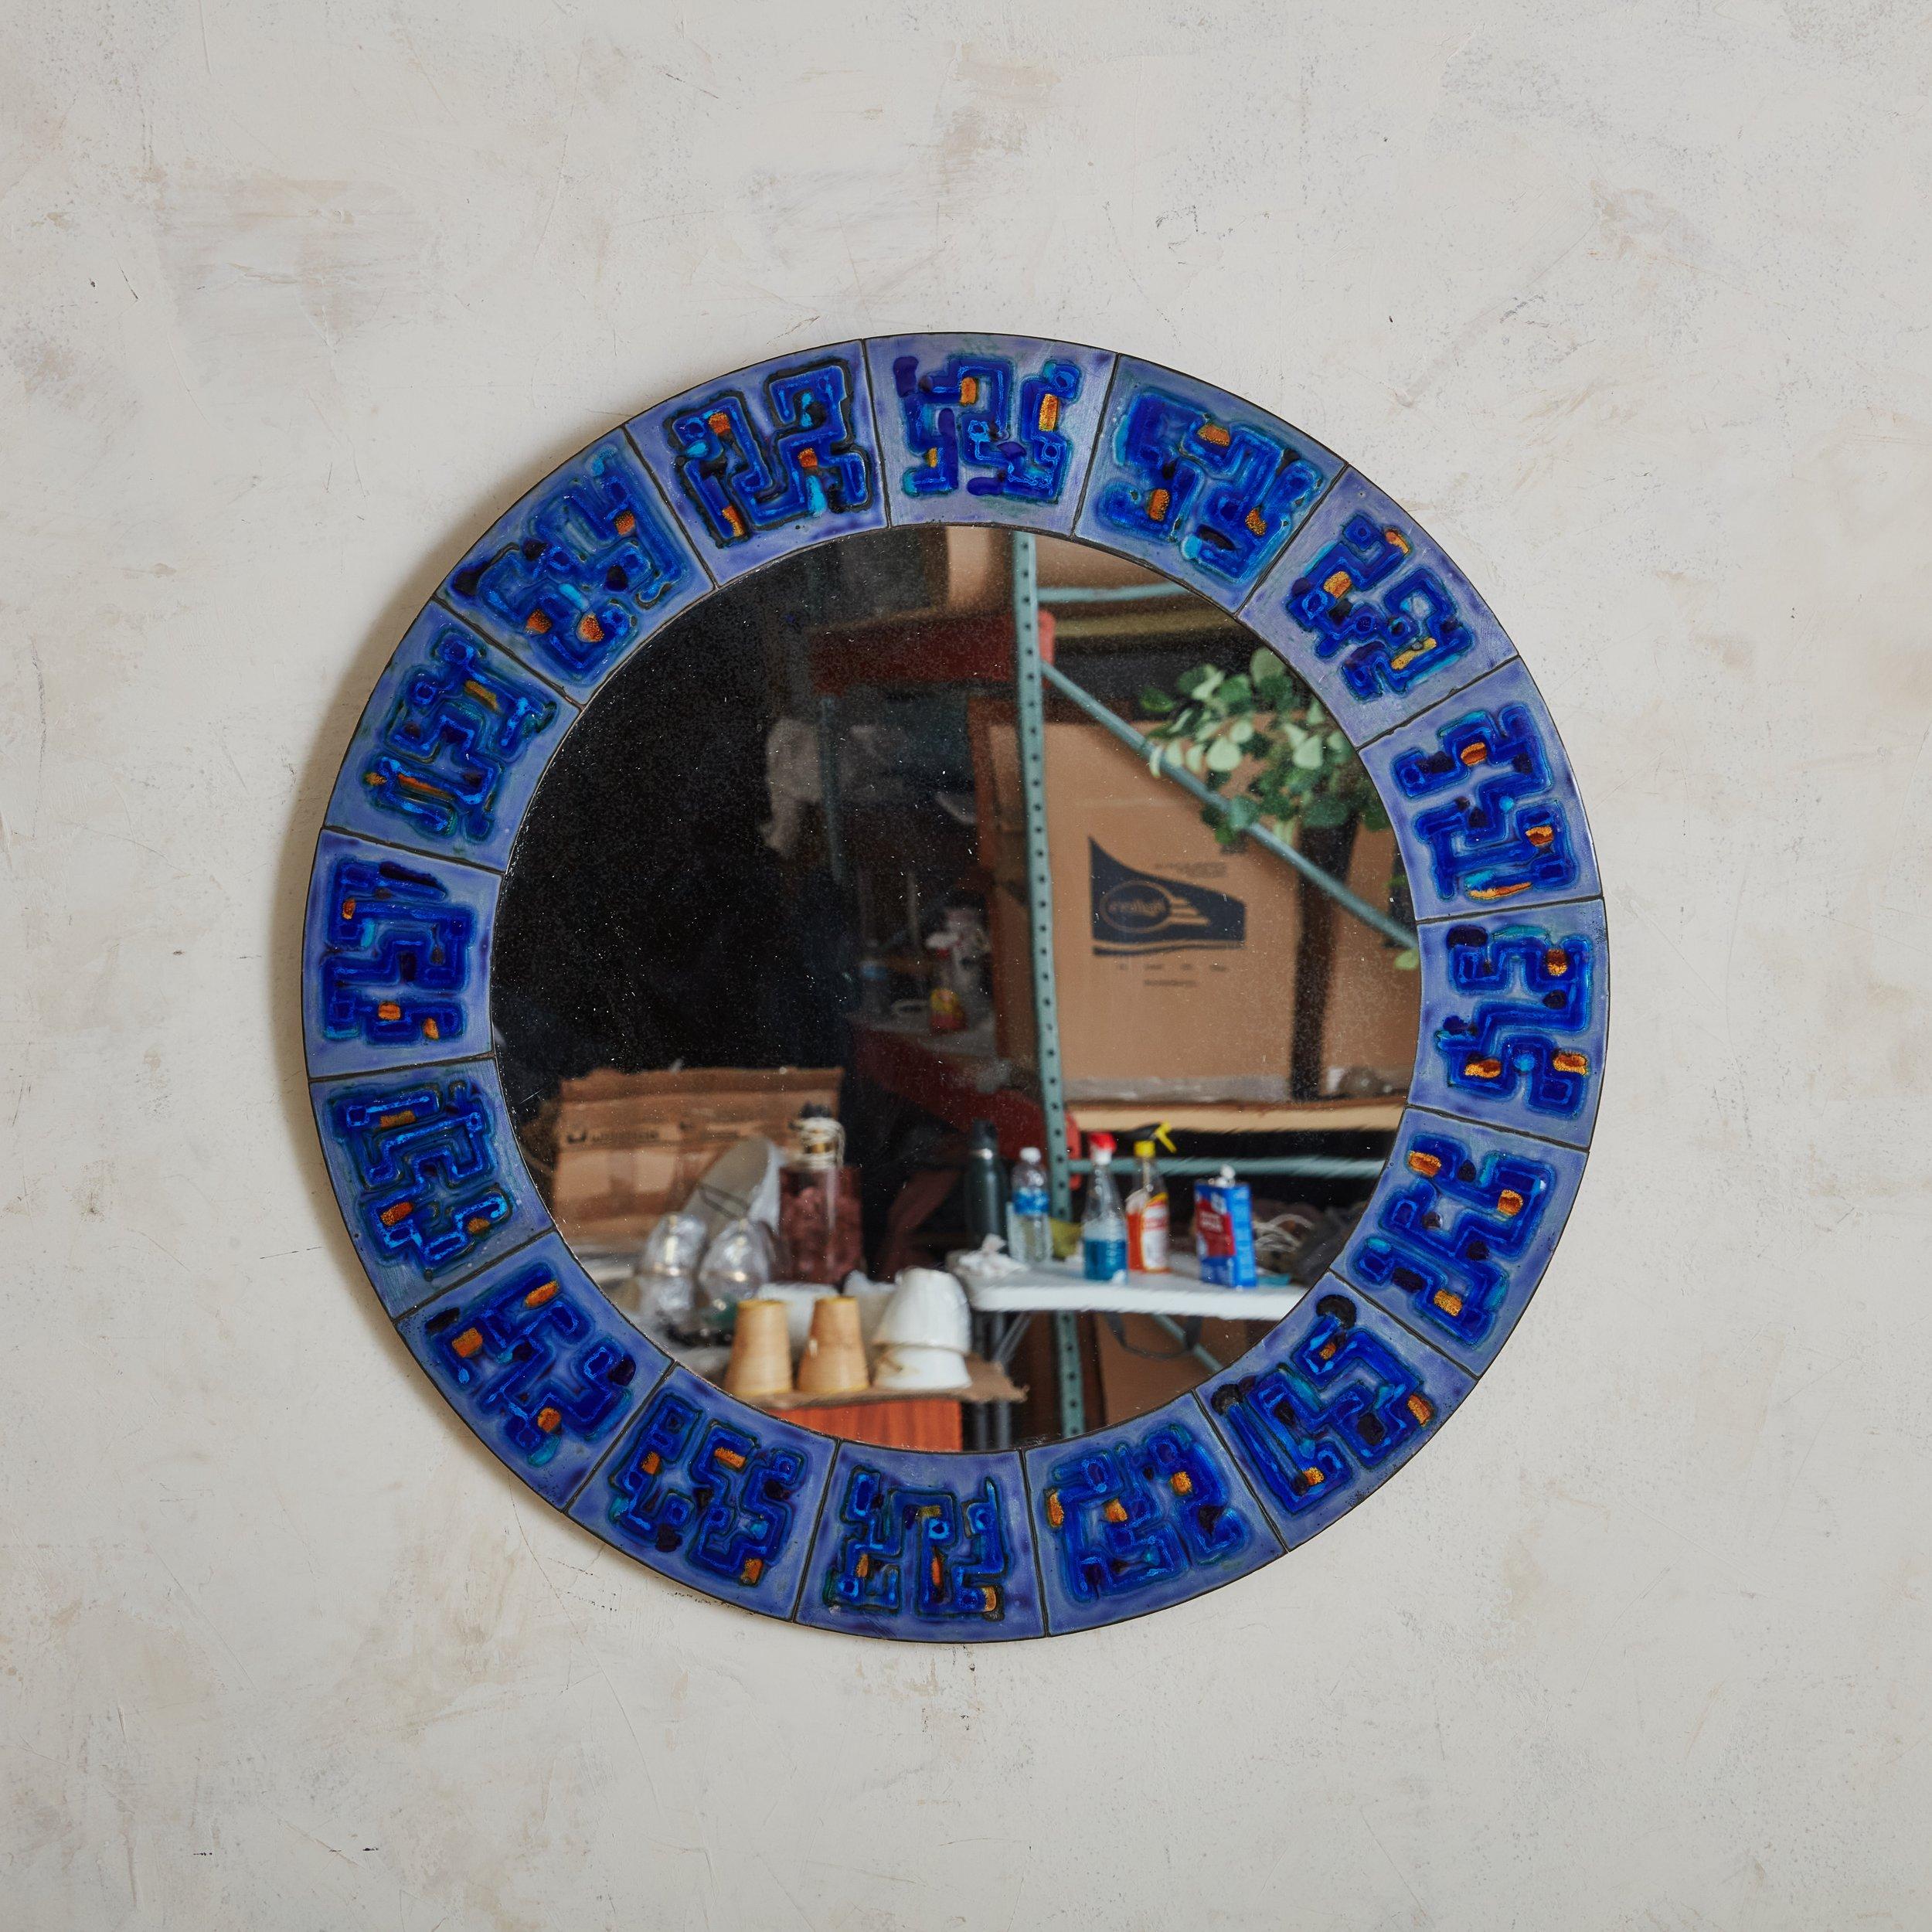 A Scandinavian Modern round wall mirror by Bodil Hagedorn Eje. Daughter of painter Thorvald Hagedorn-Olse, Bodil Eje was a Danish artist from the 20th Century who mostly worked with enamel. The mirror’s frame is composed of enameled copper plates